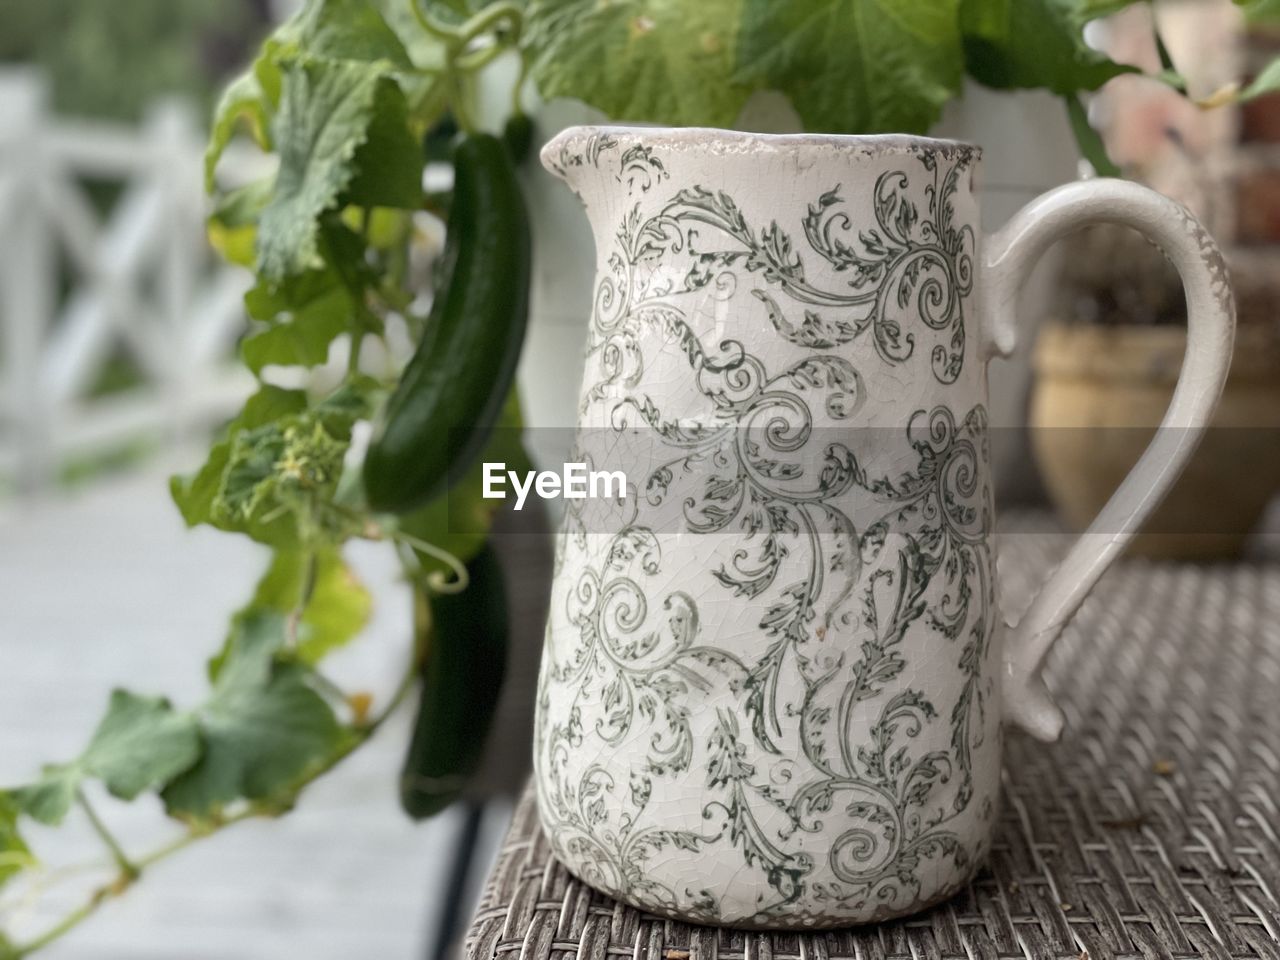 pattern, food and drink, floral pattern, drink, ceramic, mug, pitcher - jug, cup, plant, plant part, leaf, nature, no people, focus on foreground, tea cup, refreshment, flower, porcelain, art, close-up, indoors, freshness, food, coffee cup, tea, table, jug, tableware, green, craft, hot drink, ornate, wellbeing